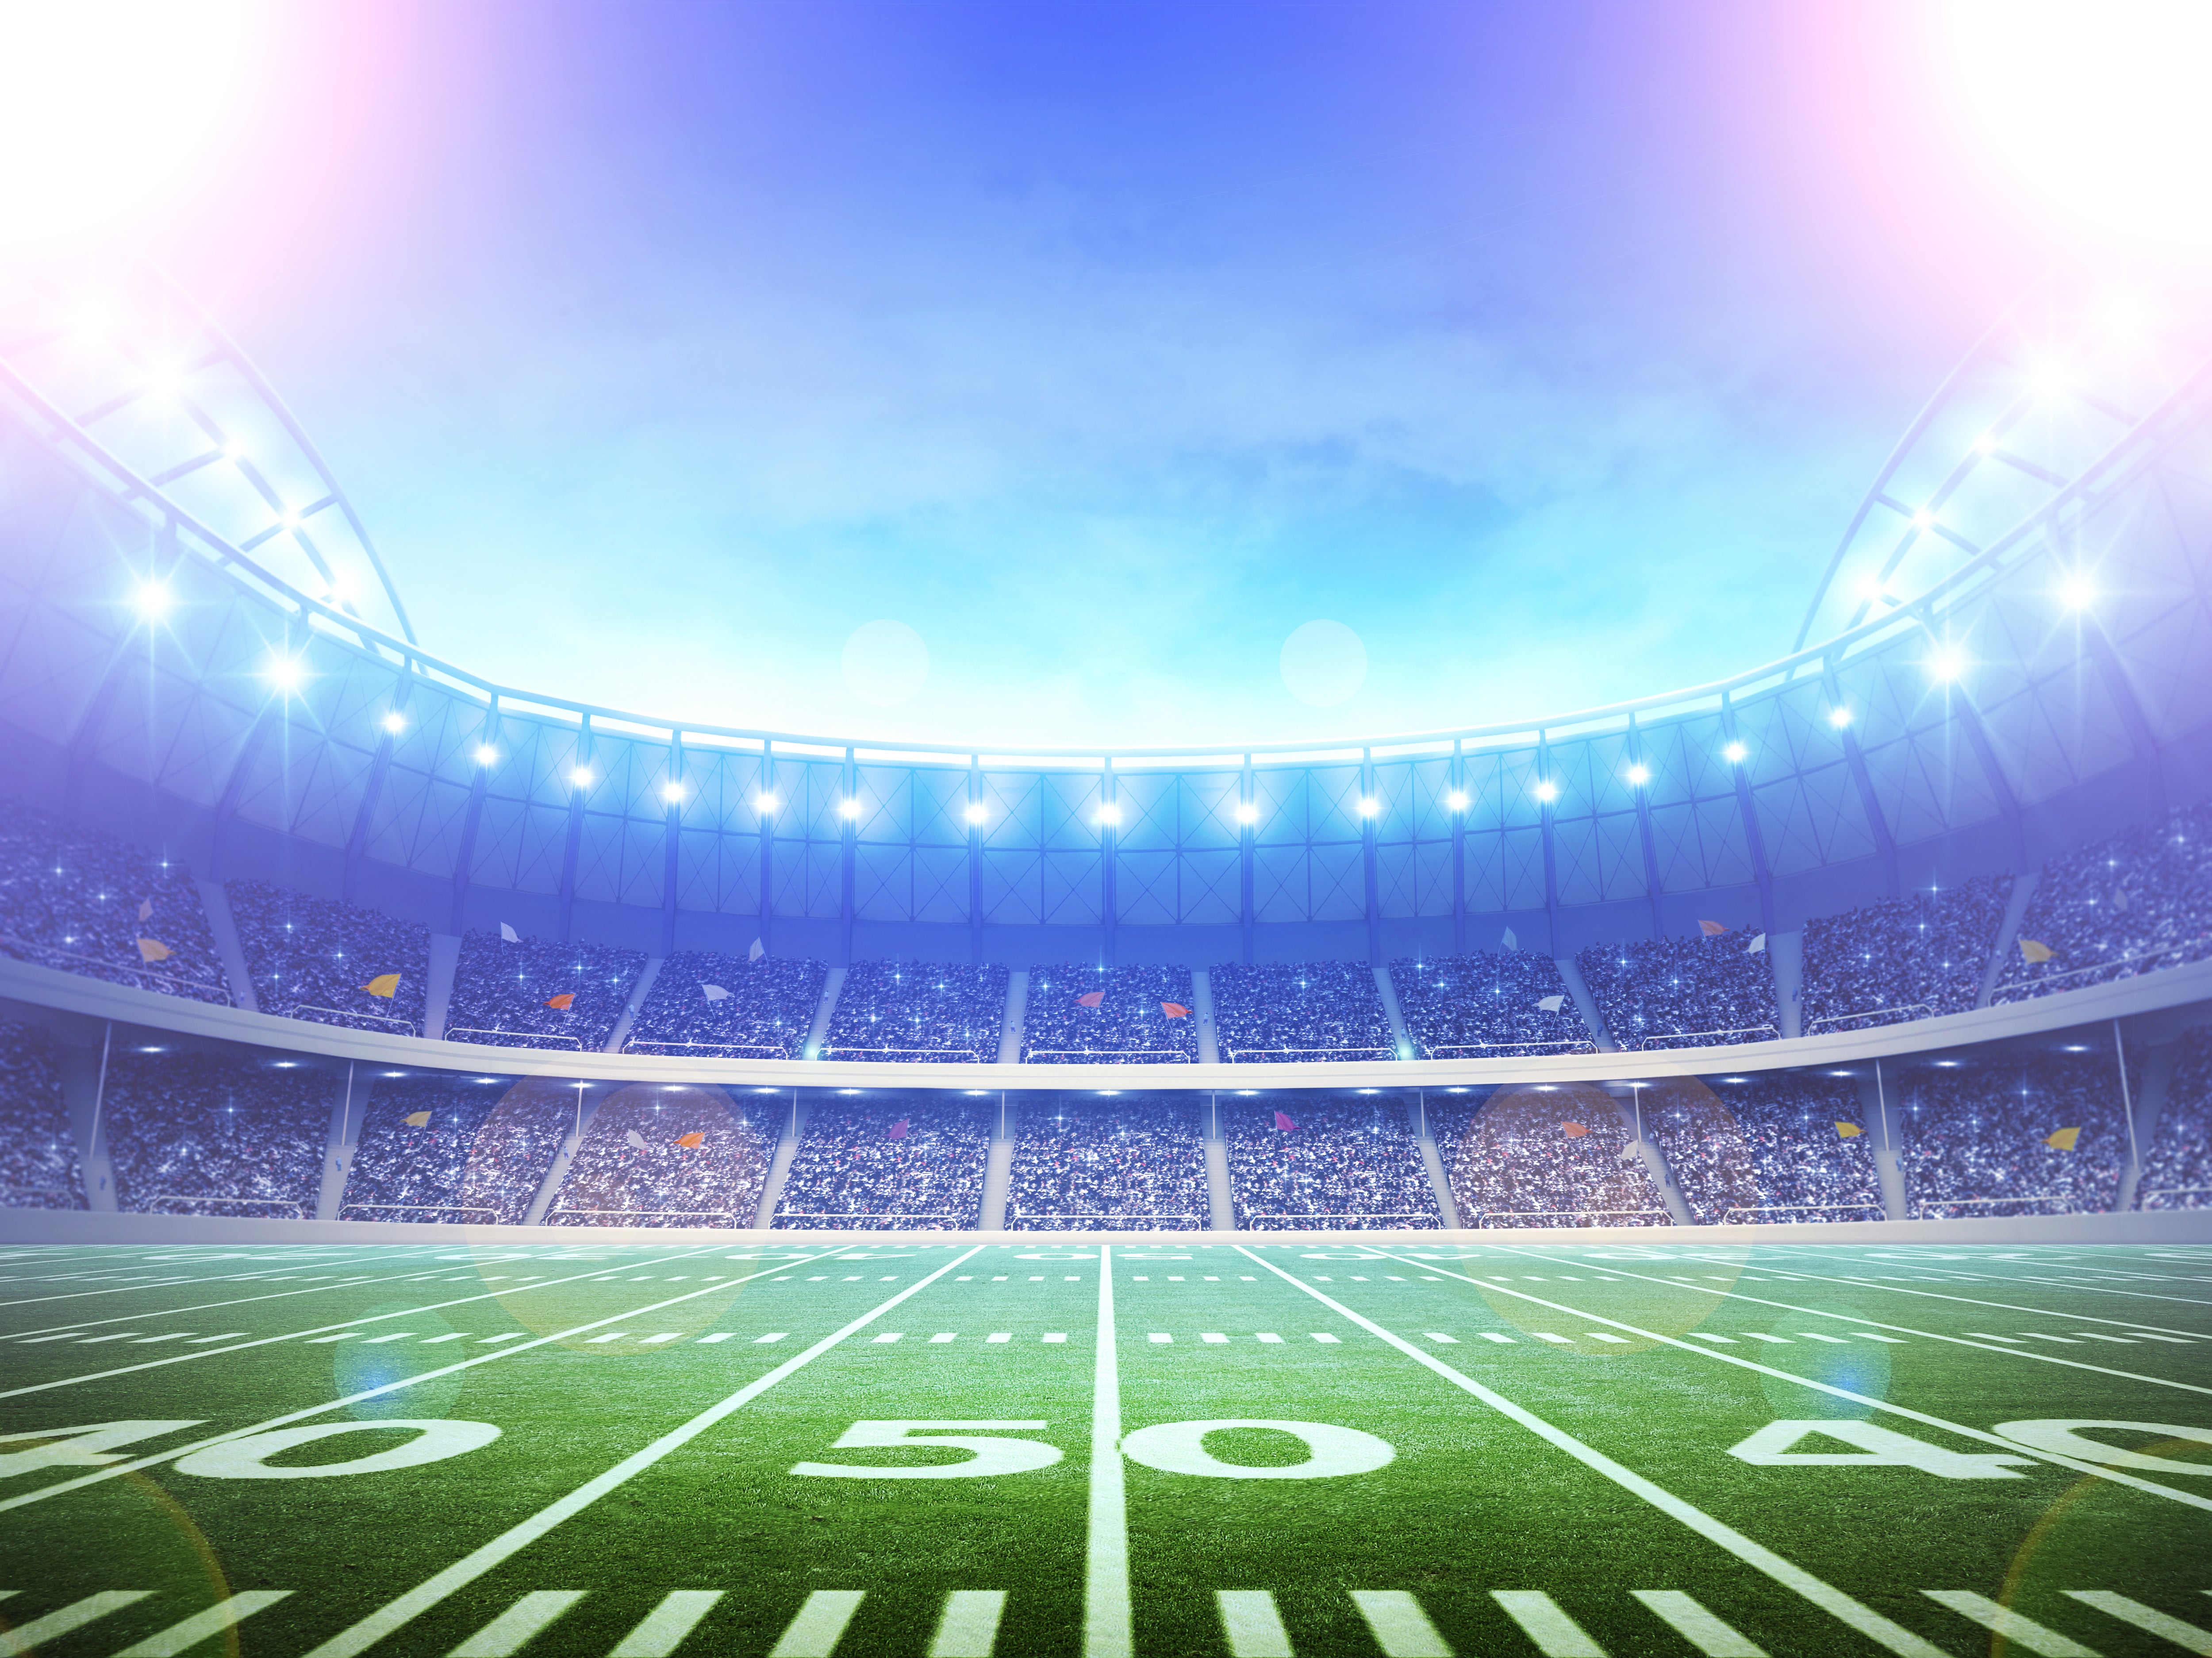 An imaginary stadium is modelled and rendered.